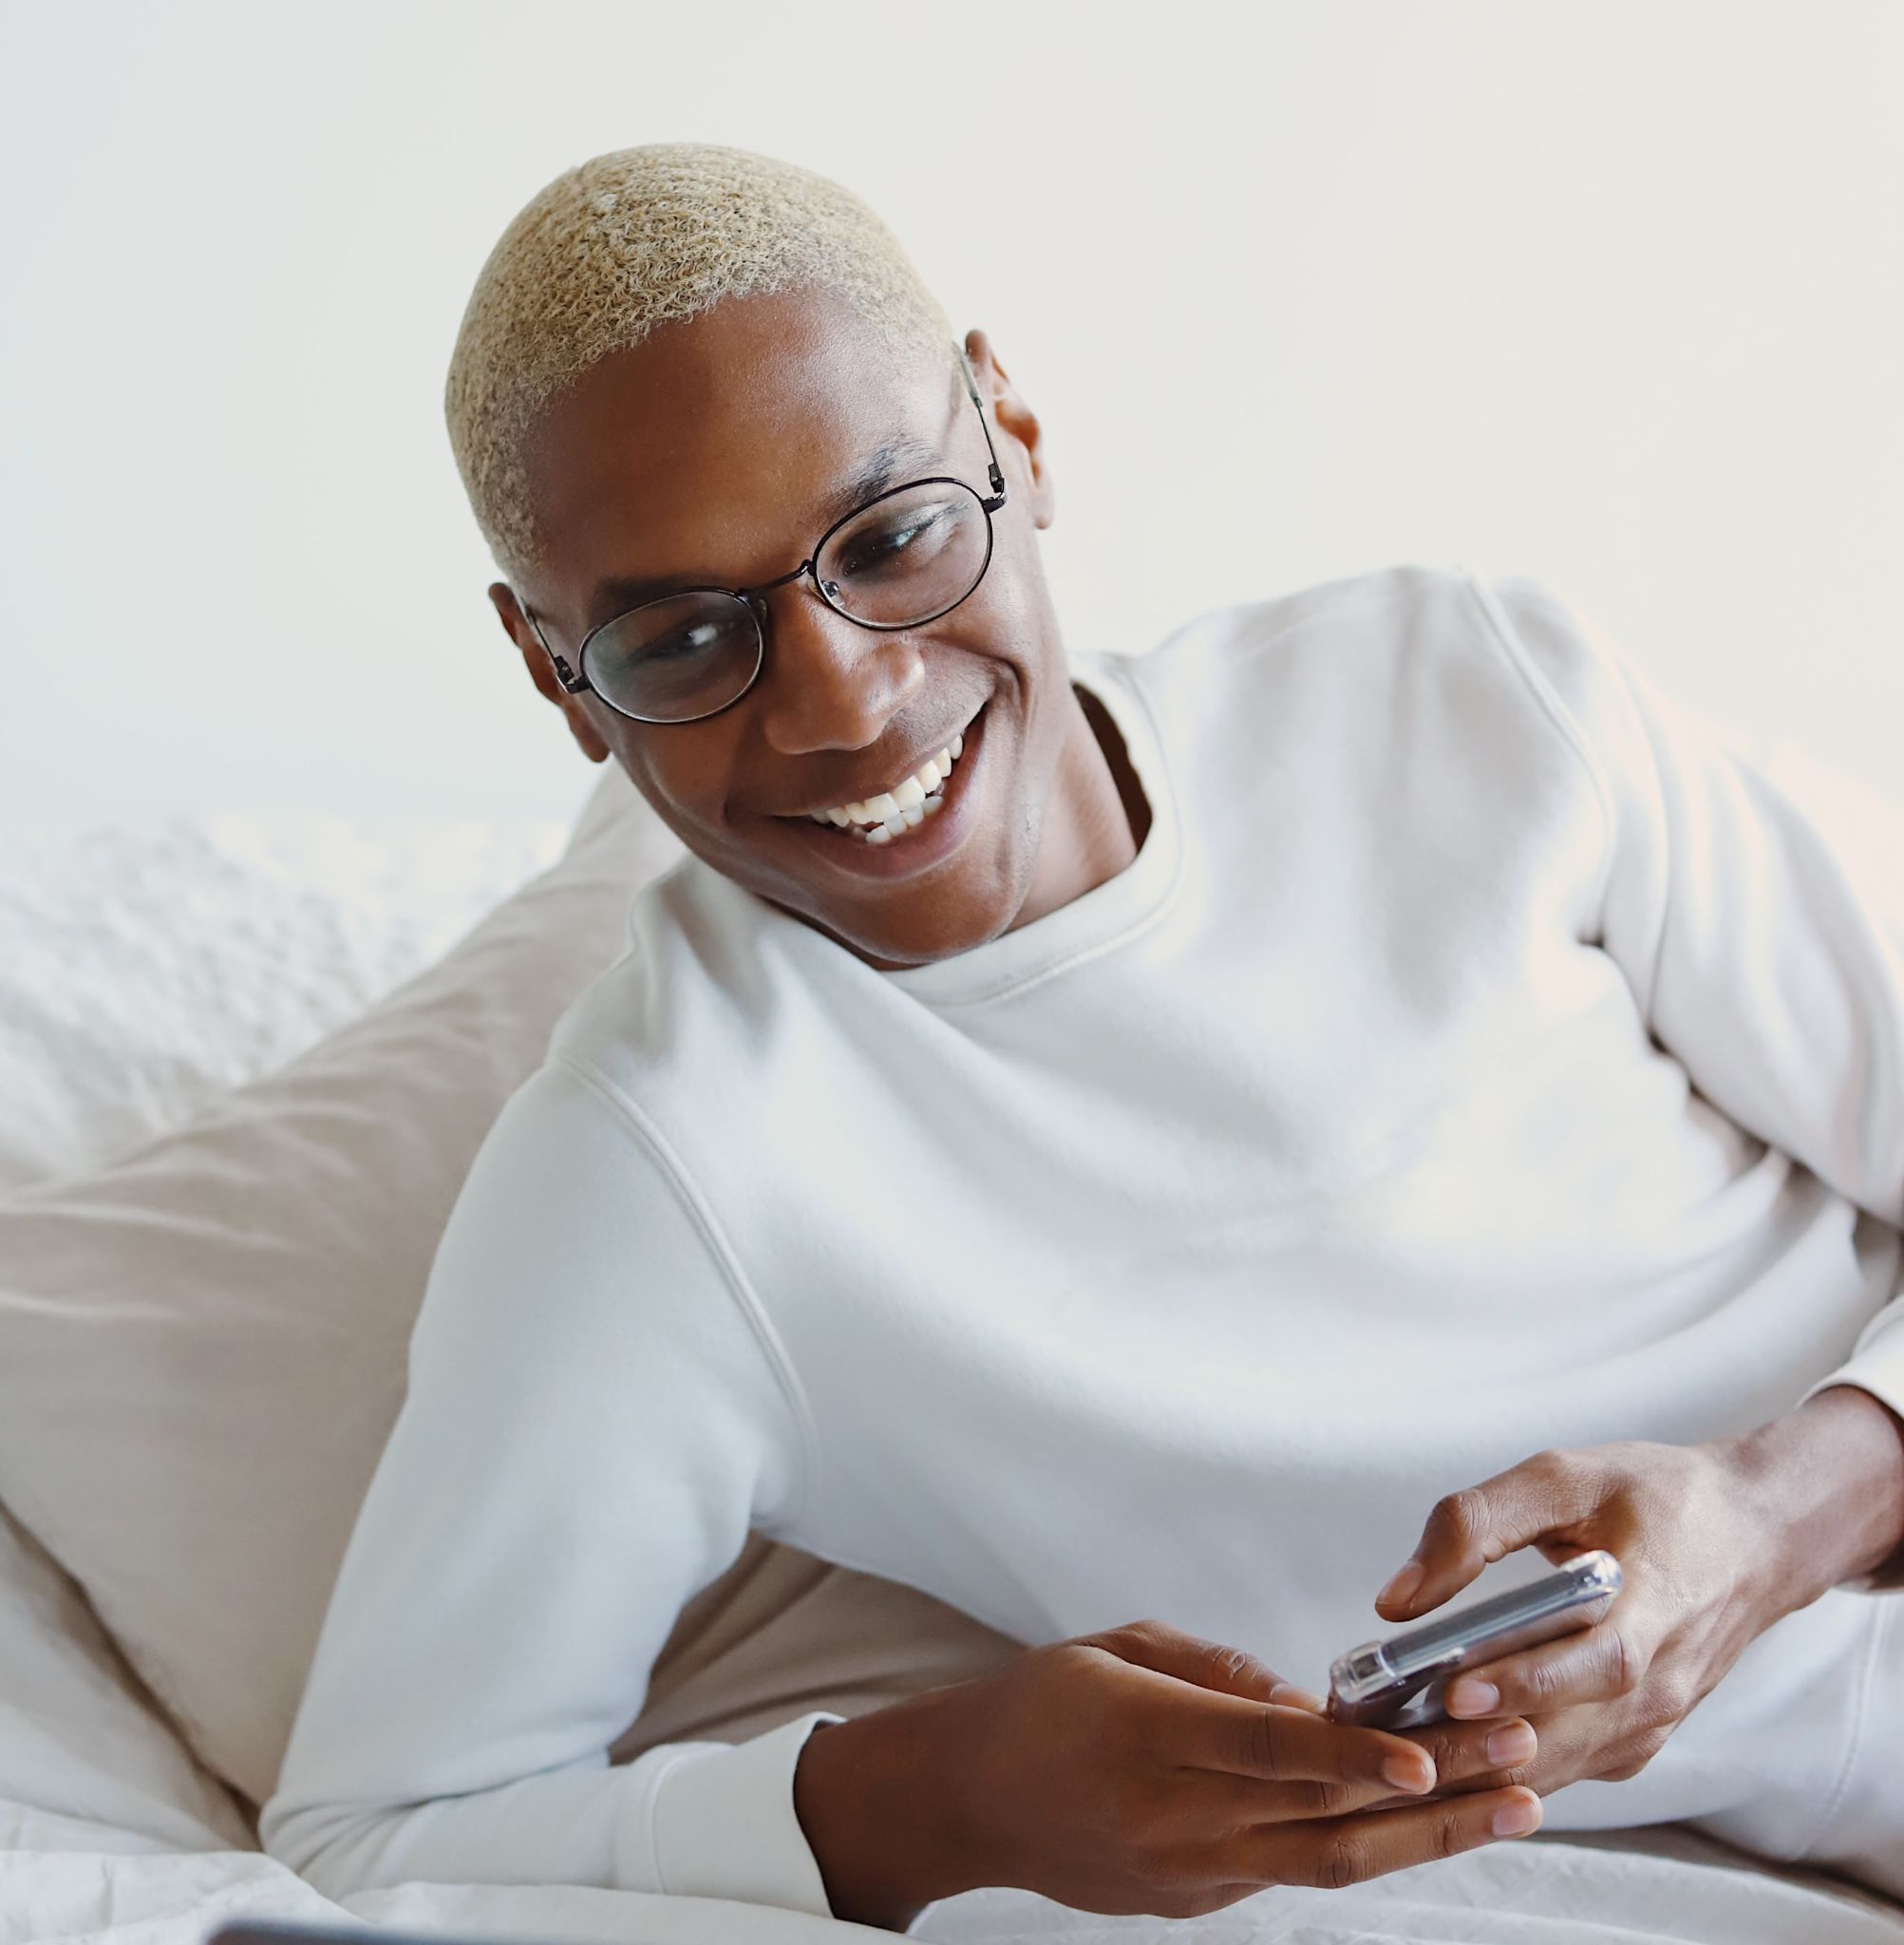 A picture of a young man, smiling while looking at his phone while lying on a bed